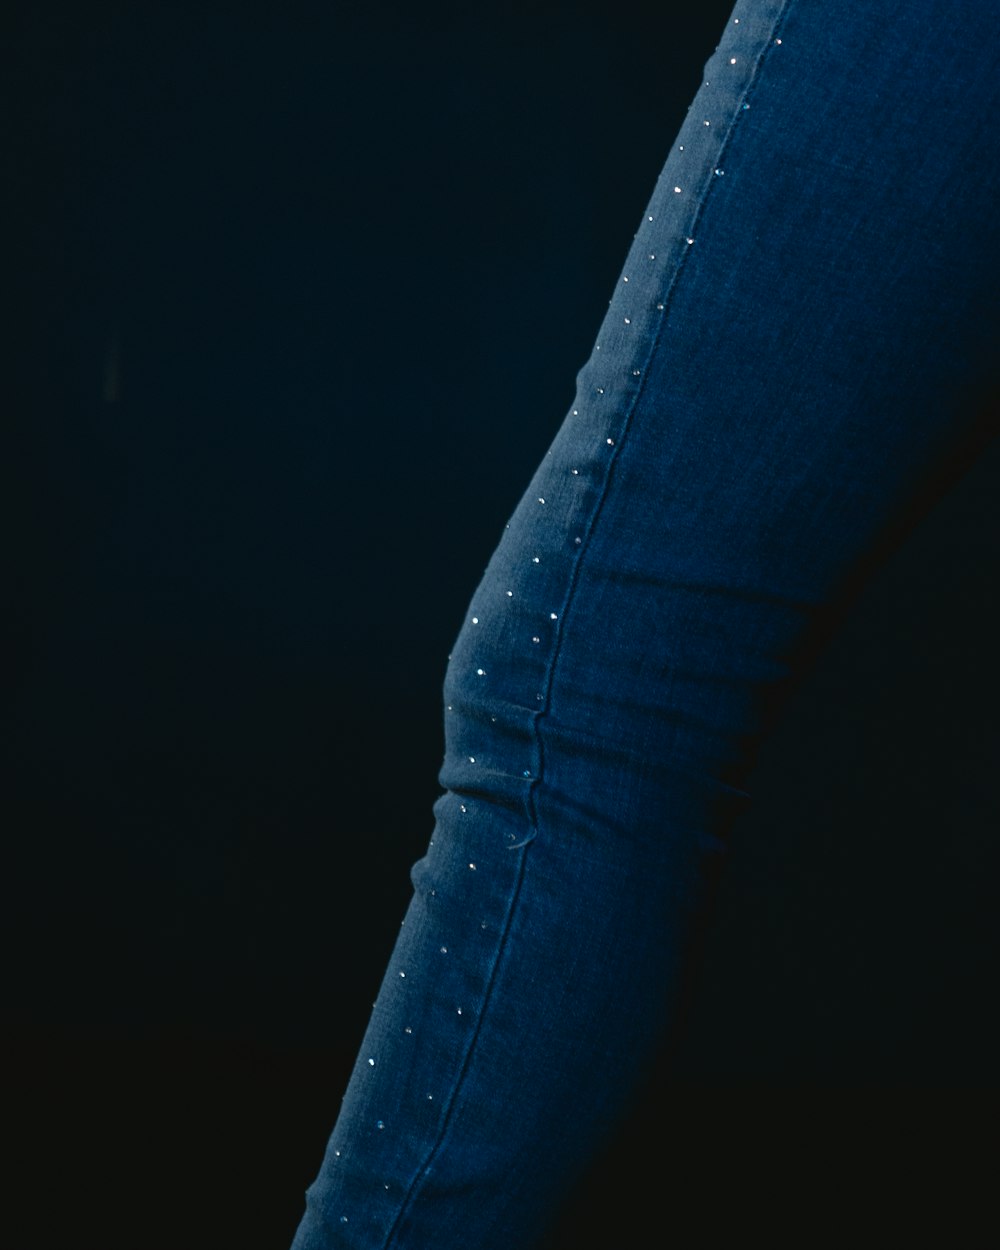 a close up of a person's legs wearing jeans